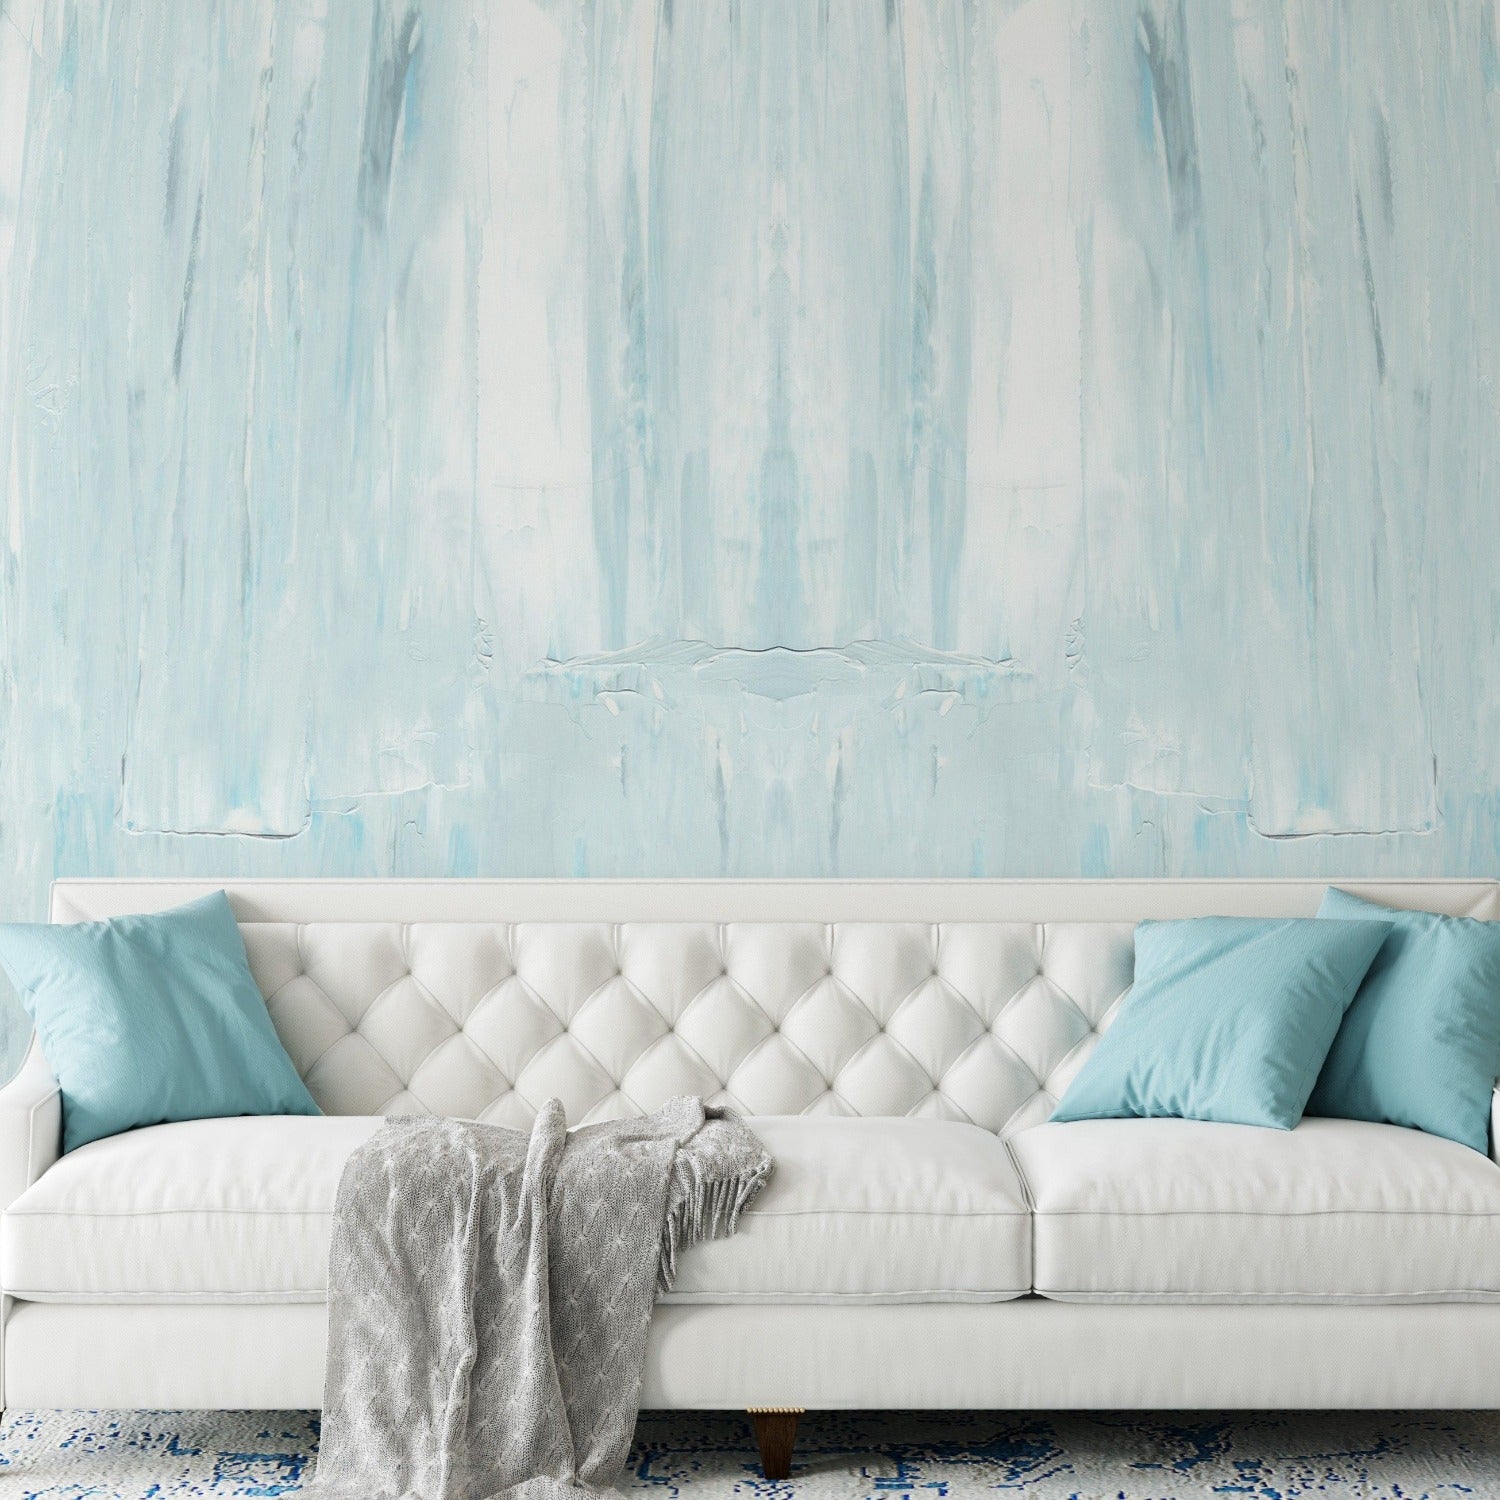 Living room featuring Blue Paint Texture Wallpaper with an abstract, vertical brushstroke design. The wall behind a white tufted sofa with blue throw pillows and a gray blanket showcases the wallpaper's dynamic and artistic texture.